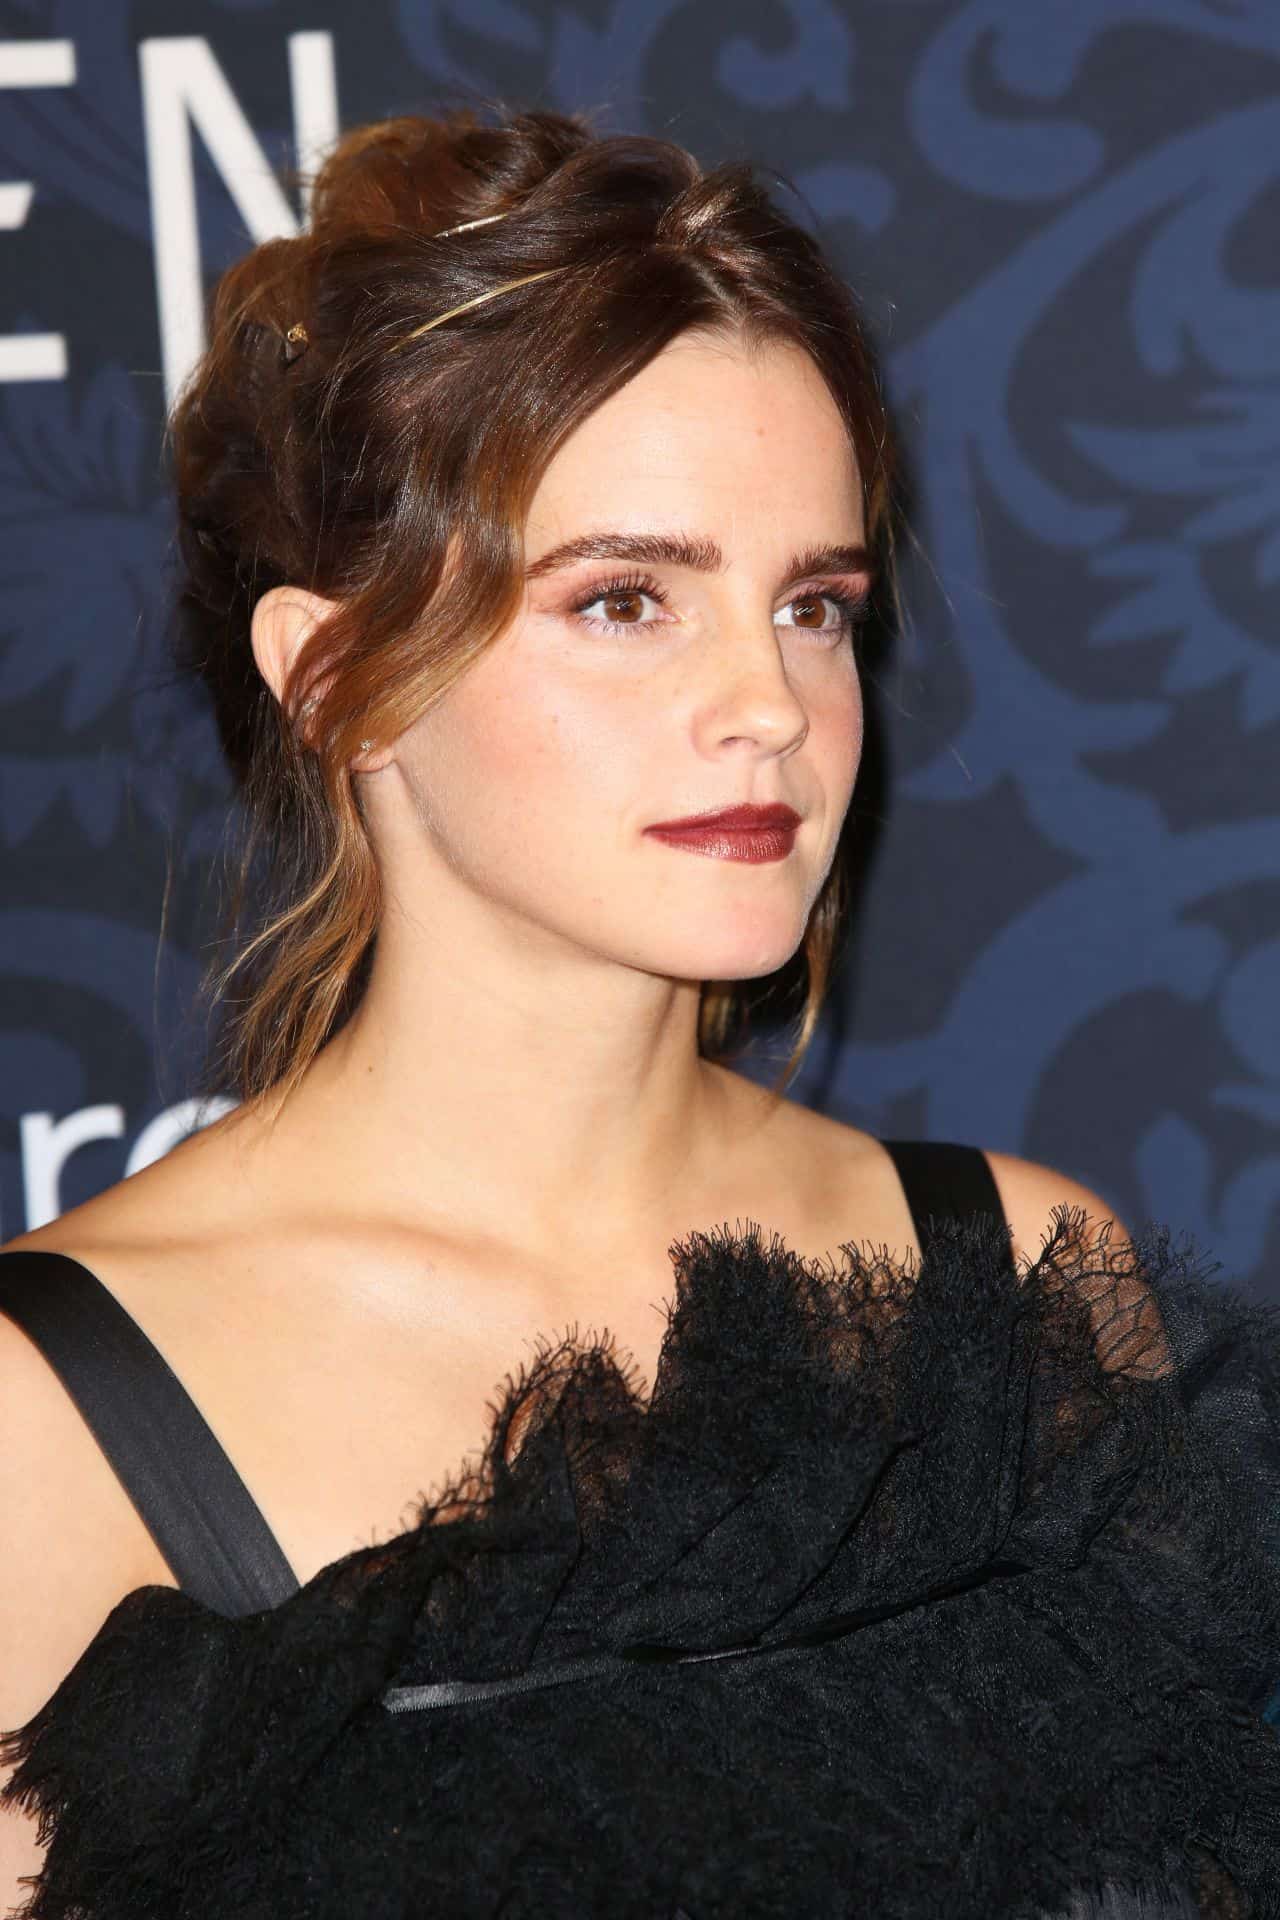 Emma Watson Wowed All at the World Premiere of “Little Women” in NY